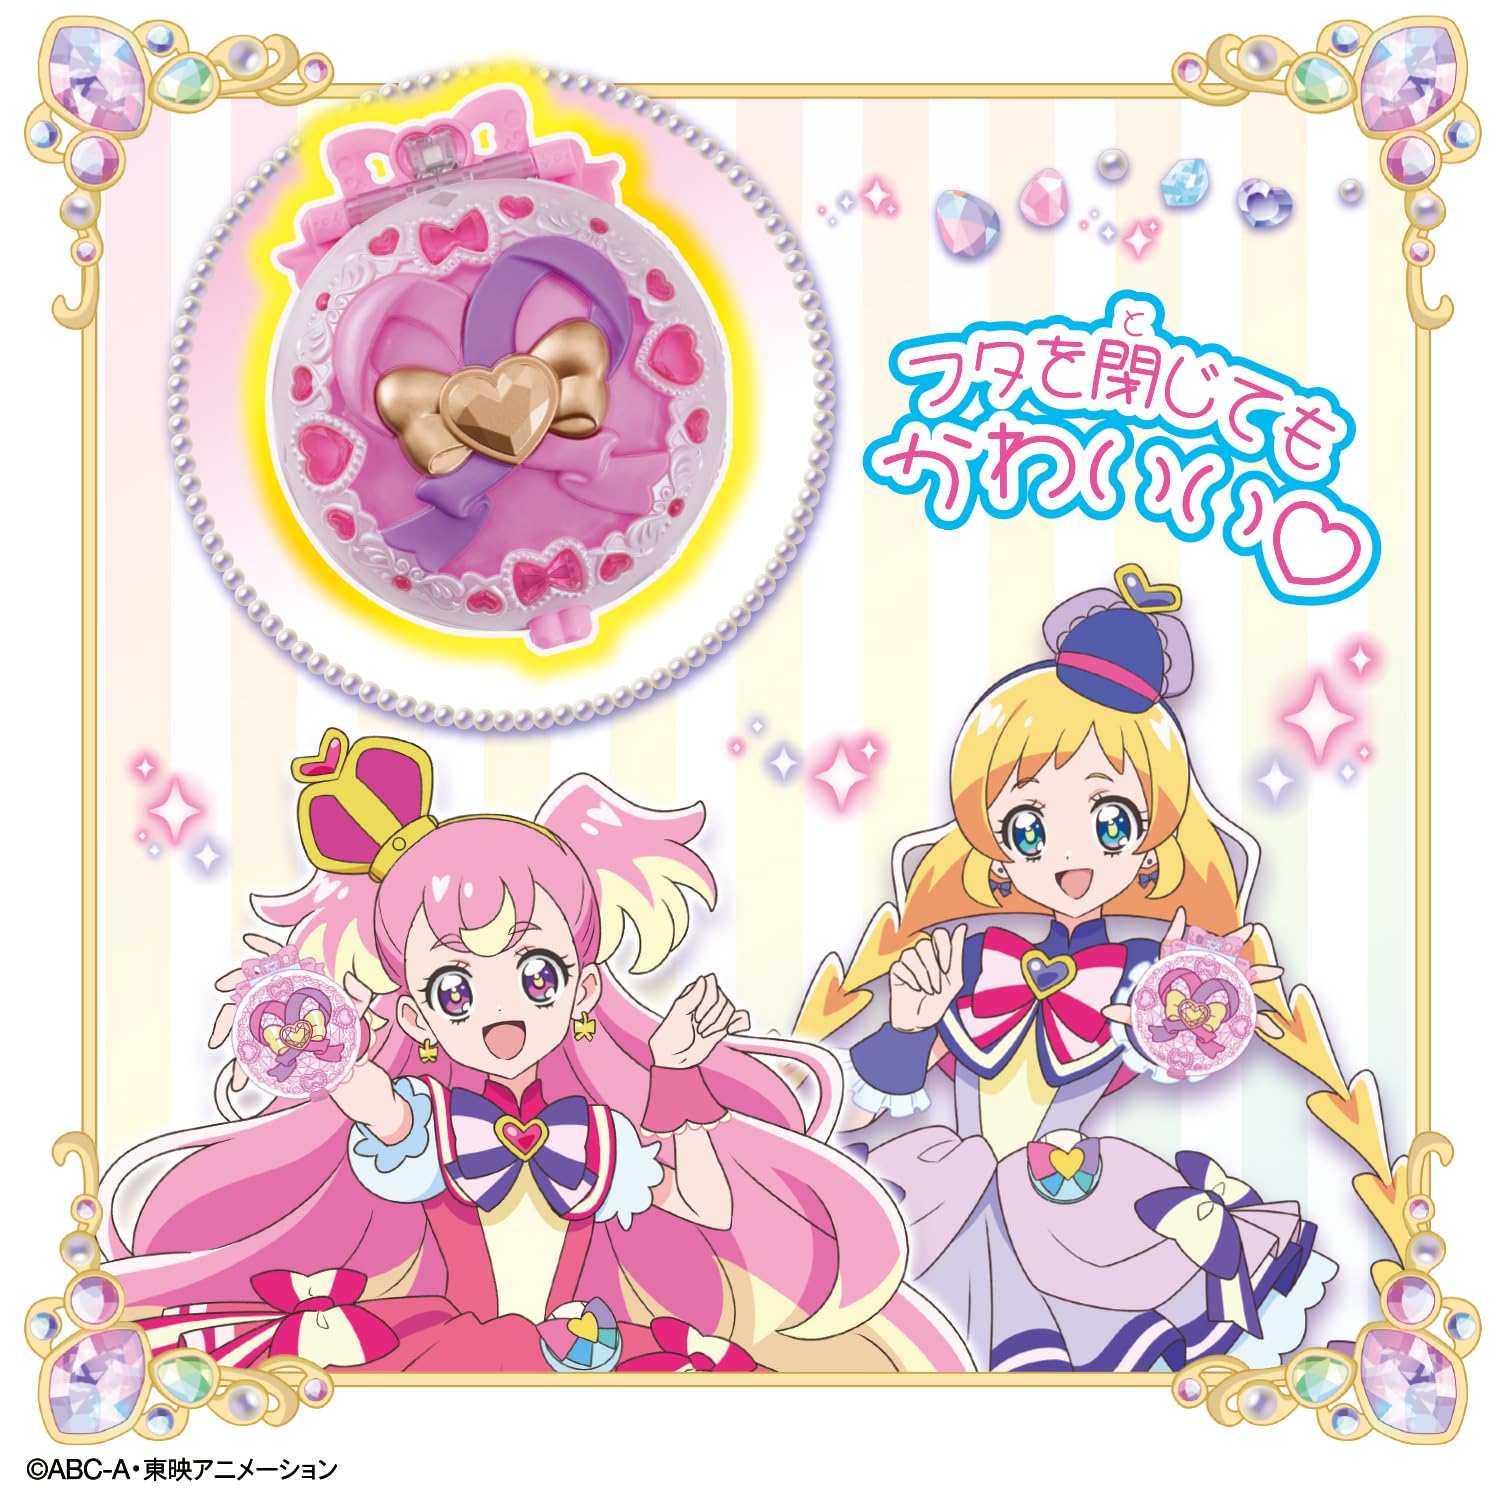  wrapping correspondence Precure ..........! colorful Evolution metamorphosis one da full Park to special set 